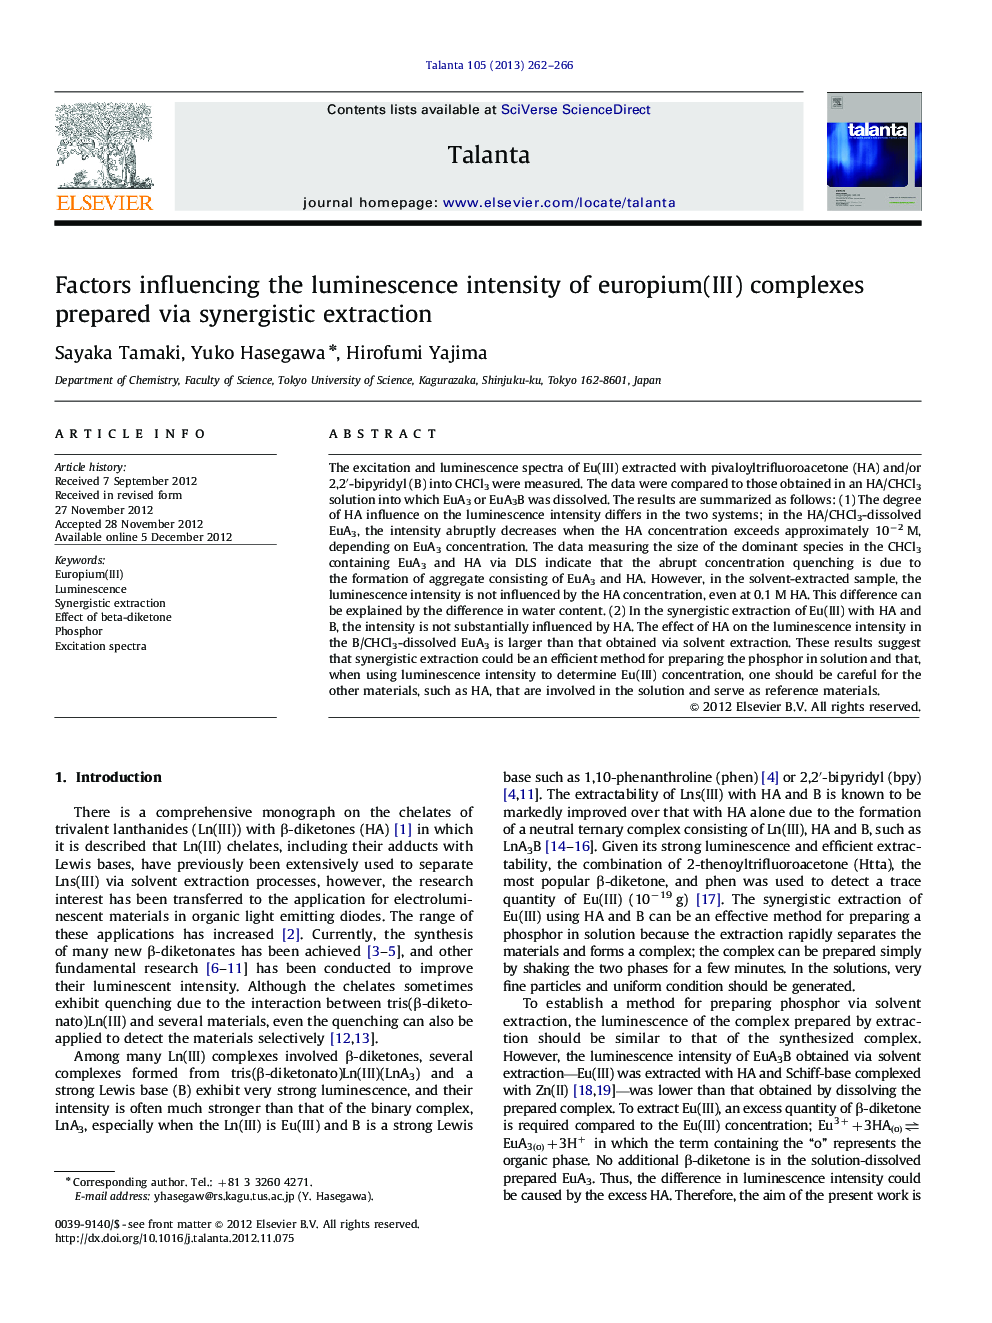 Factors influencing the luminescence intensity of europium(III) complexes prepared via synergistic extraction